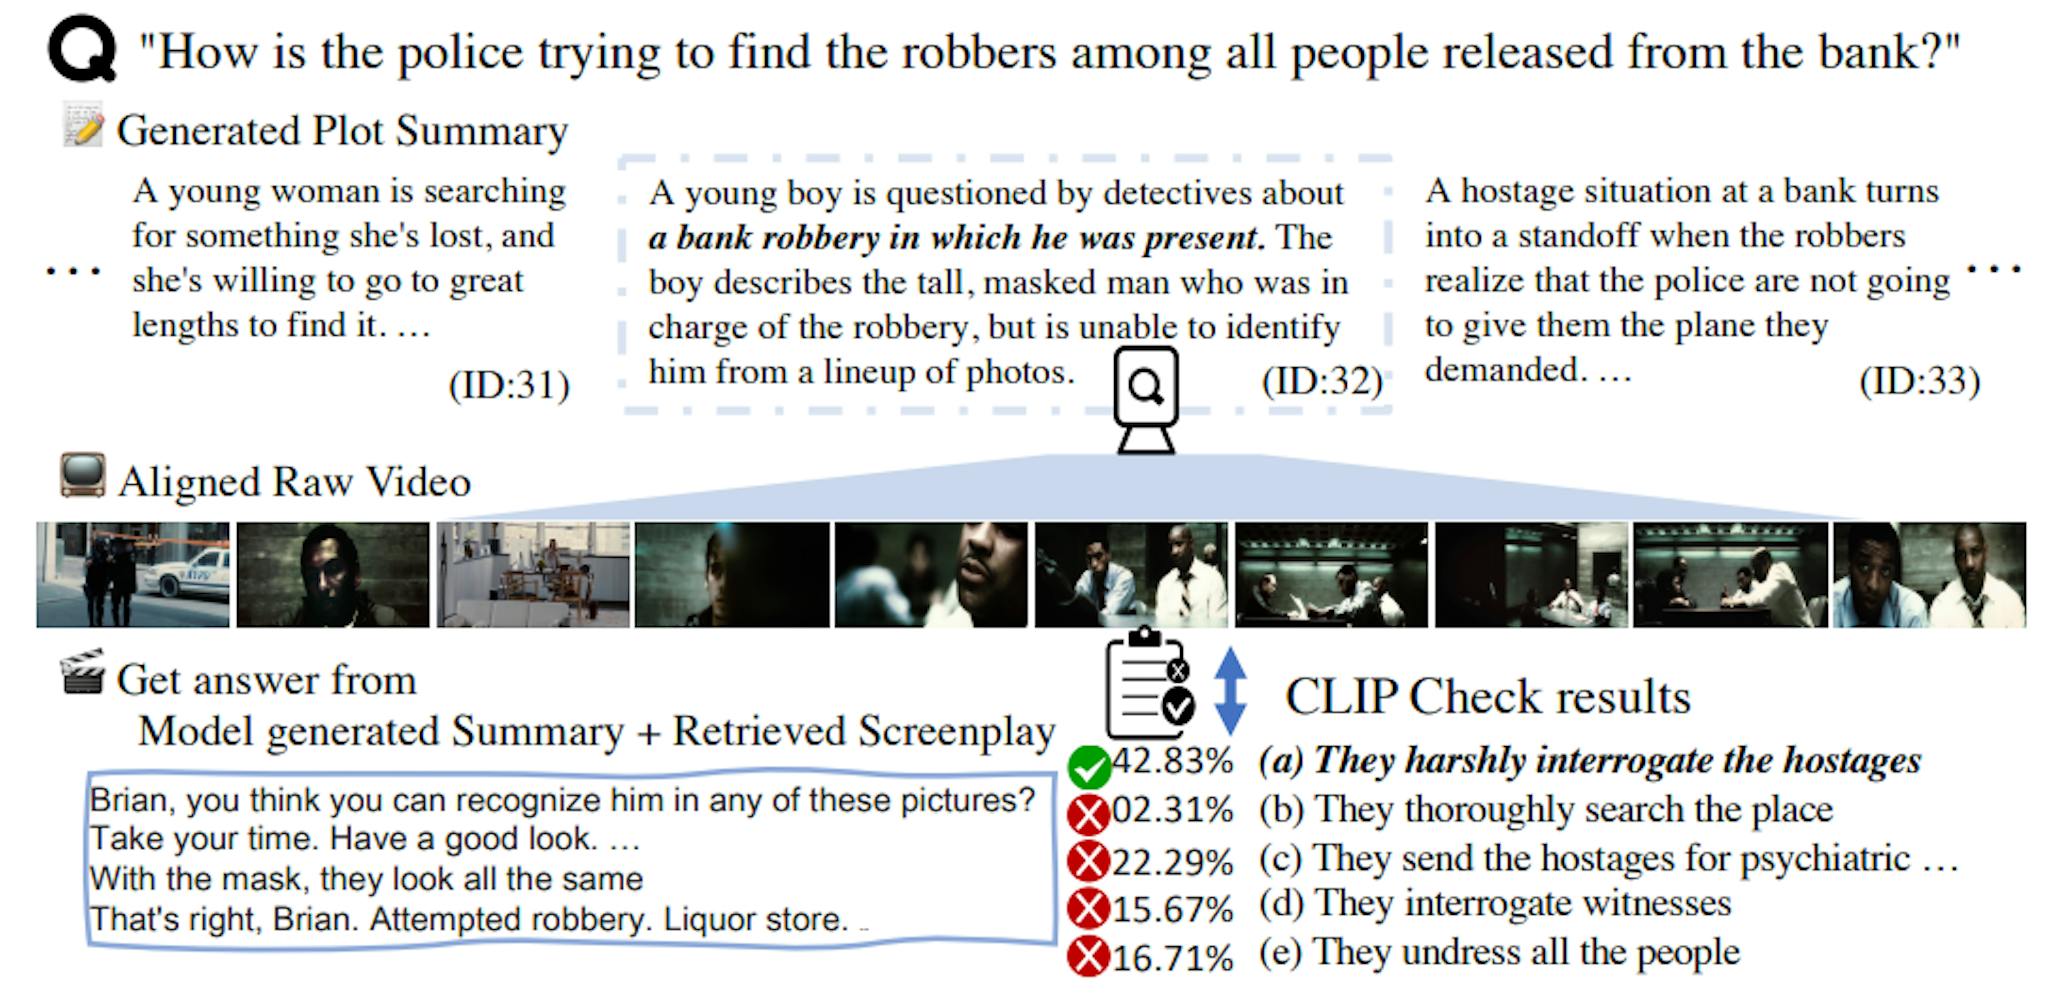 Figure 2: The qualitative result showing our proposed Long Story Short (LSS) model that generates and retrieves the index of raw video footage. When the model predicts the final answer from (i) the generated Summary and (ii) the retrieved text context, CLIPCheck validates each candidate’s answers to revise the final answer for the question.